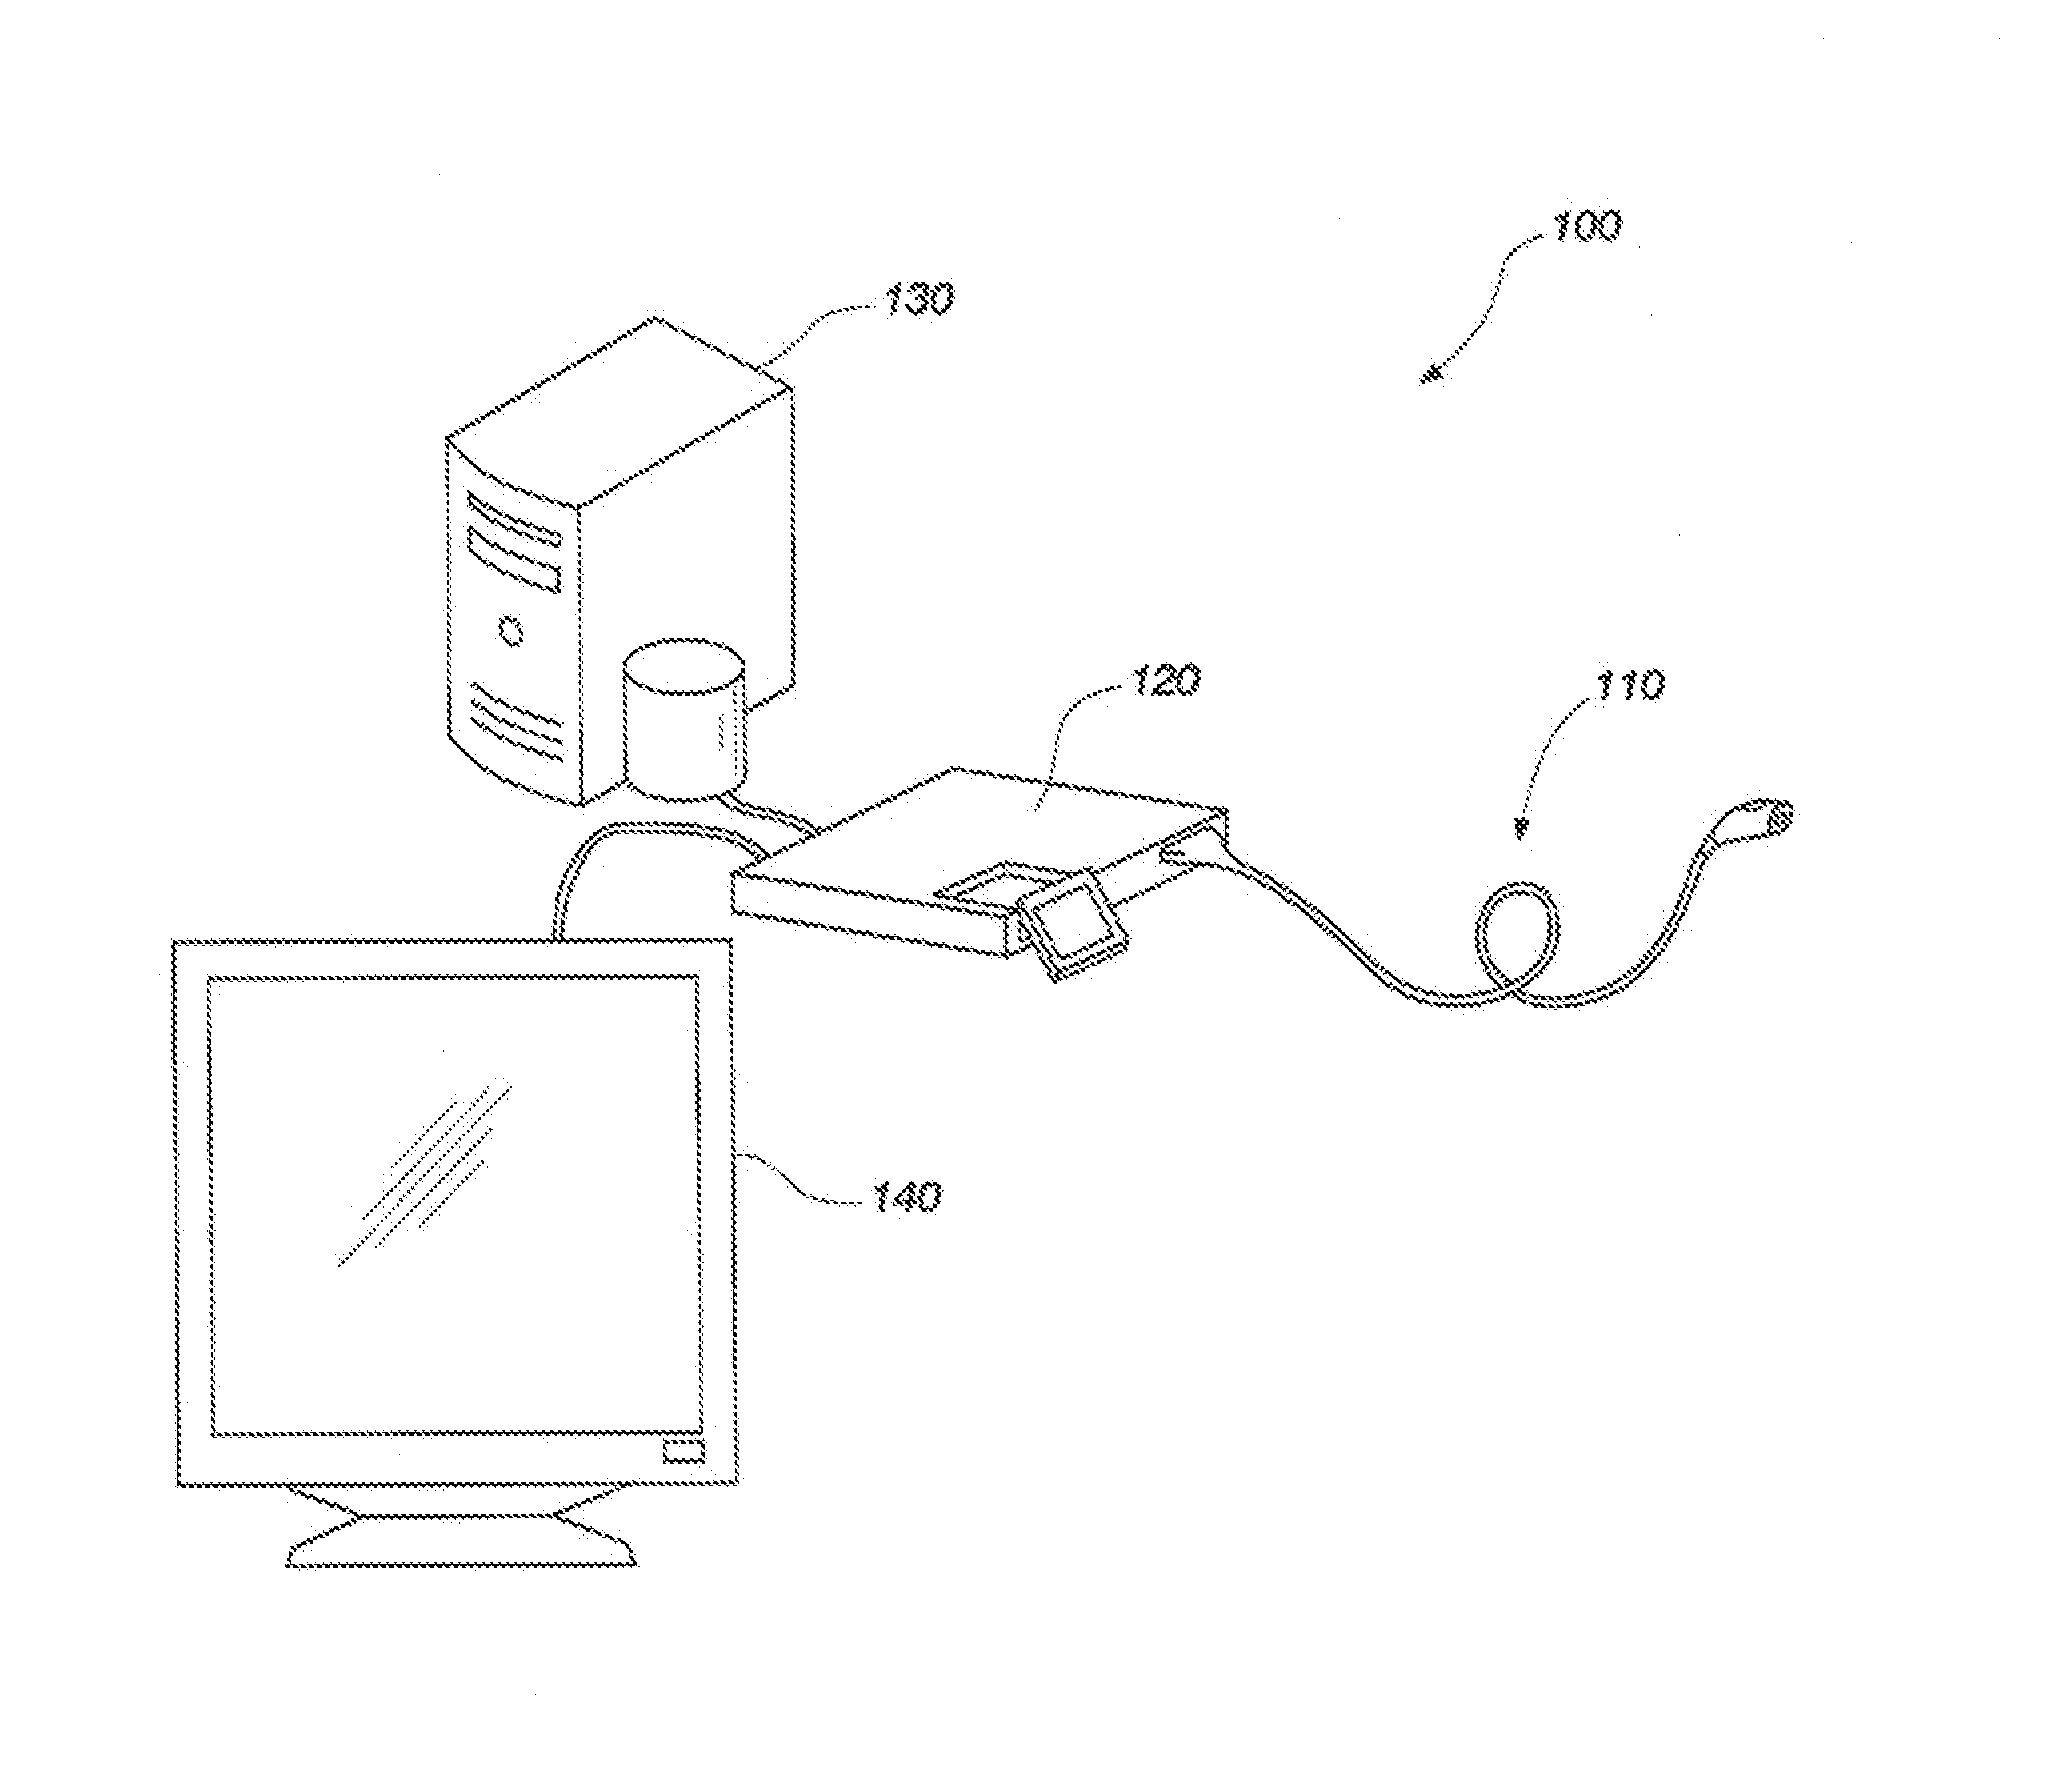 Apparatus, system and method for providing an imaging device for medical applications